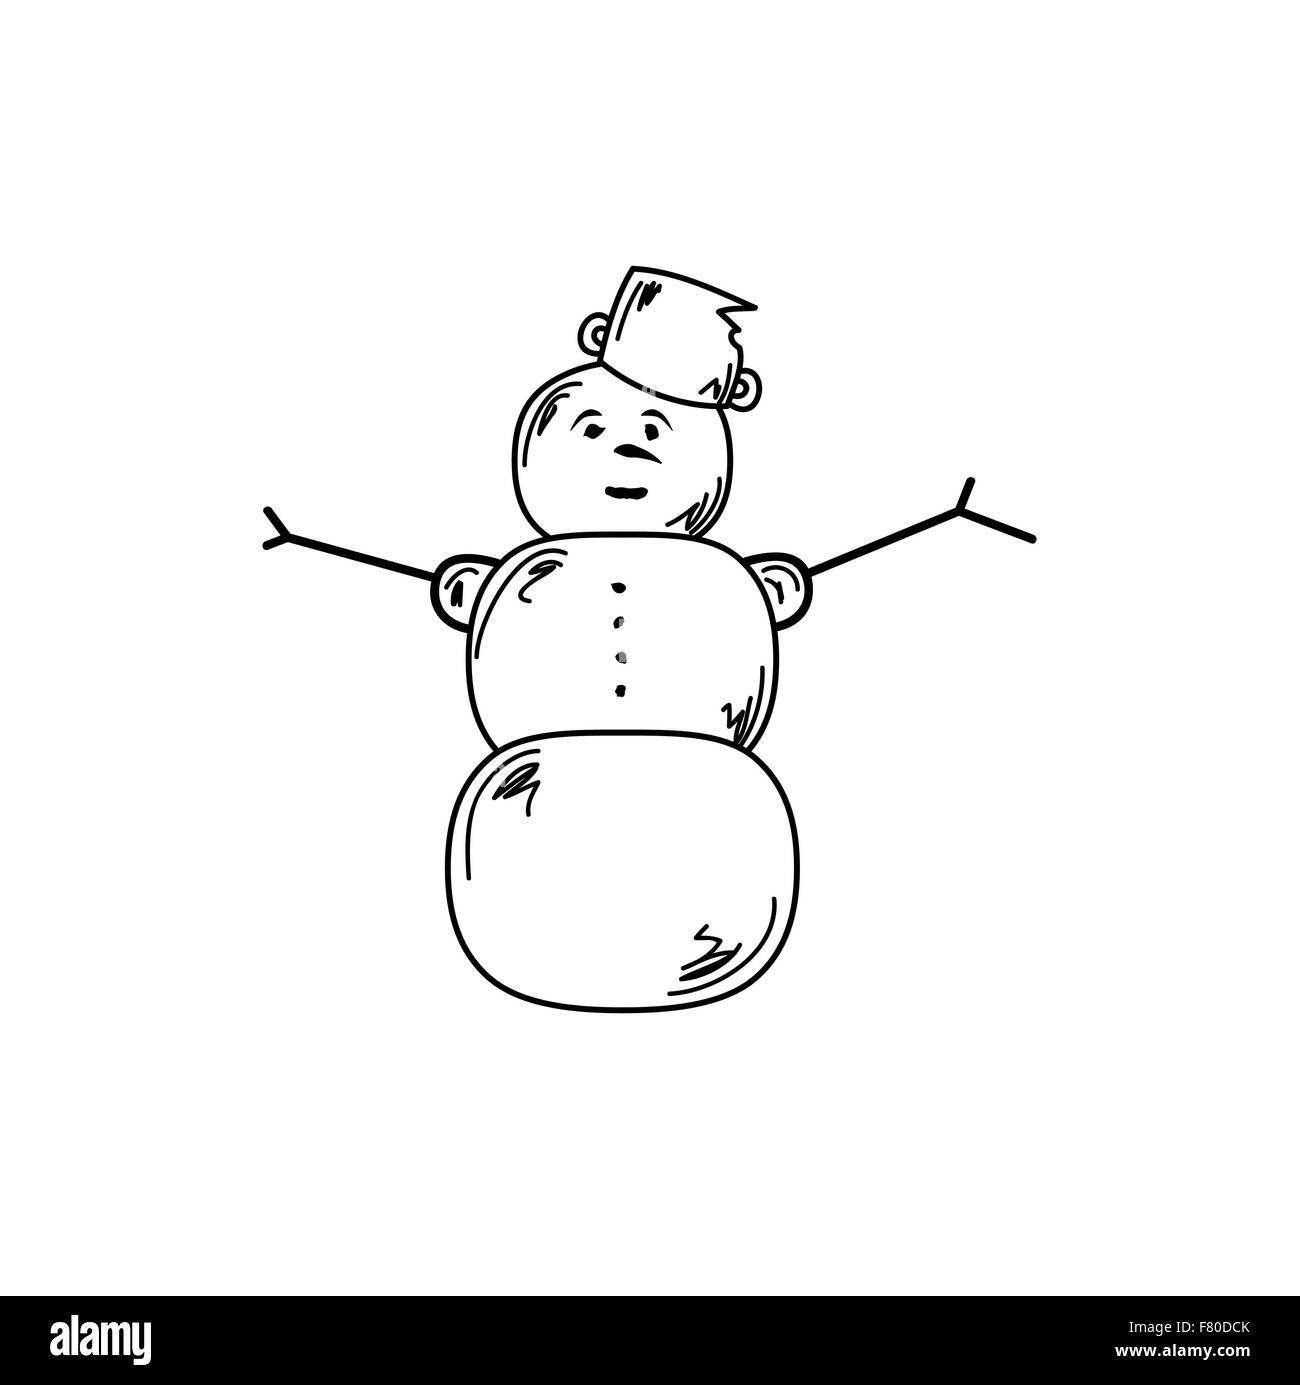 Snowman Black and White Stock Photos & Images - Alamy